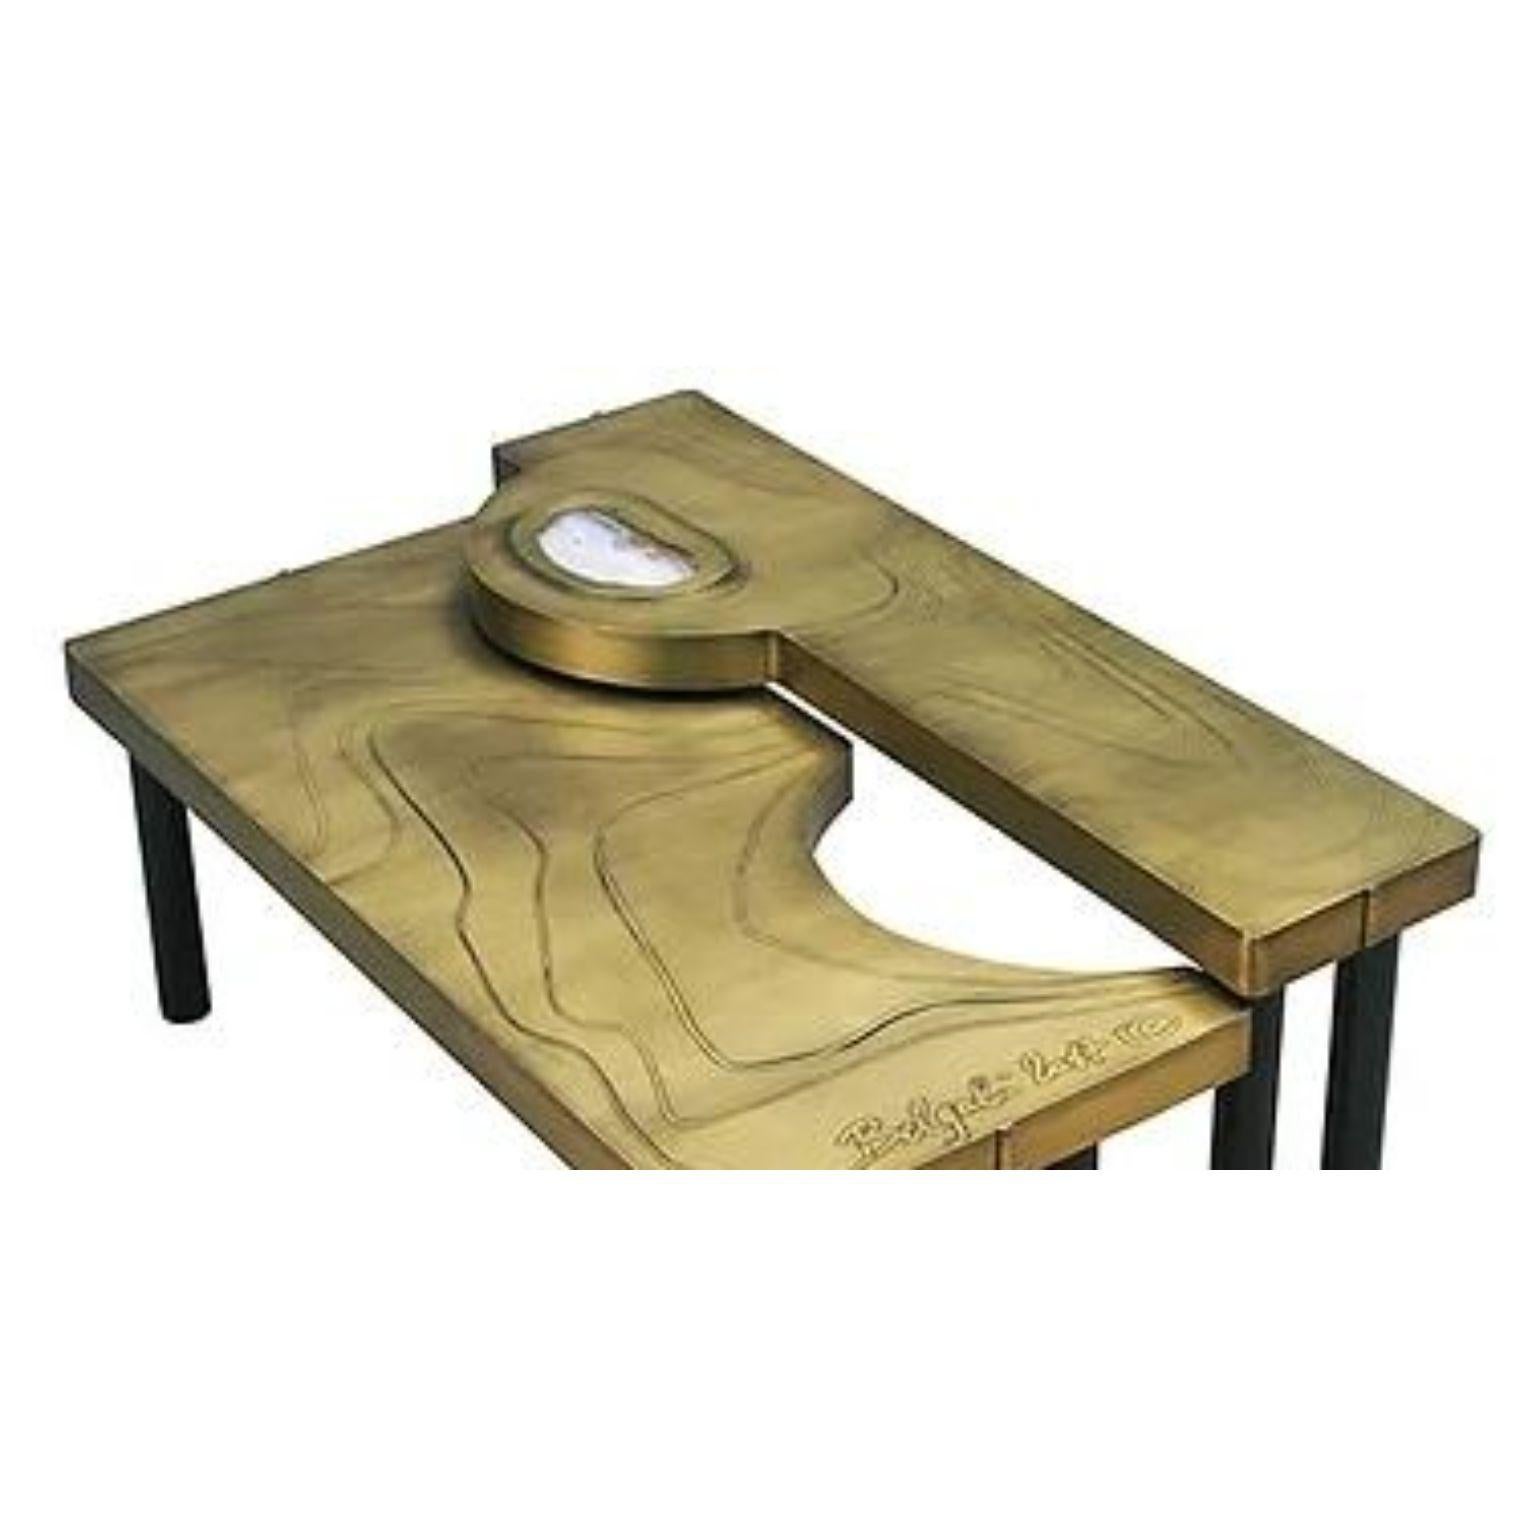 Set Of 2 Puzzle Brass Coffee Tables by Brutalist Be
One Of A Kind
Dimensions: Table 1: D 43 x W 100 x H 31 cm.
Table 2: D 36 x W 100 x H 26 cm.
Materials: Brass and agate stone.

Also available in copper and in matte, glossy or black-patinated